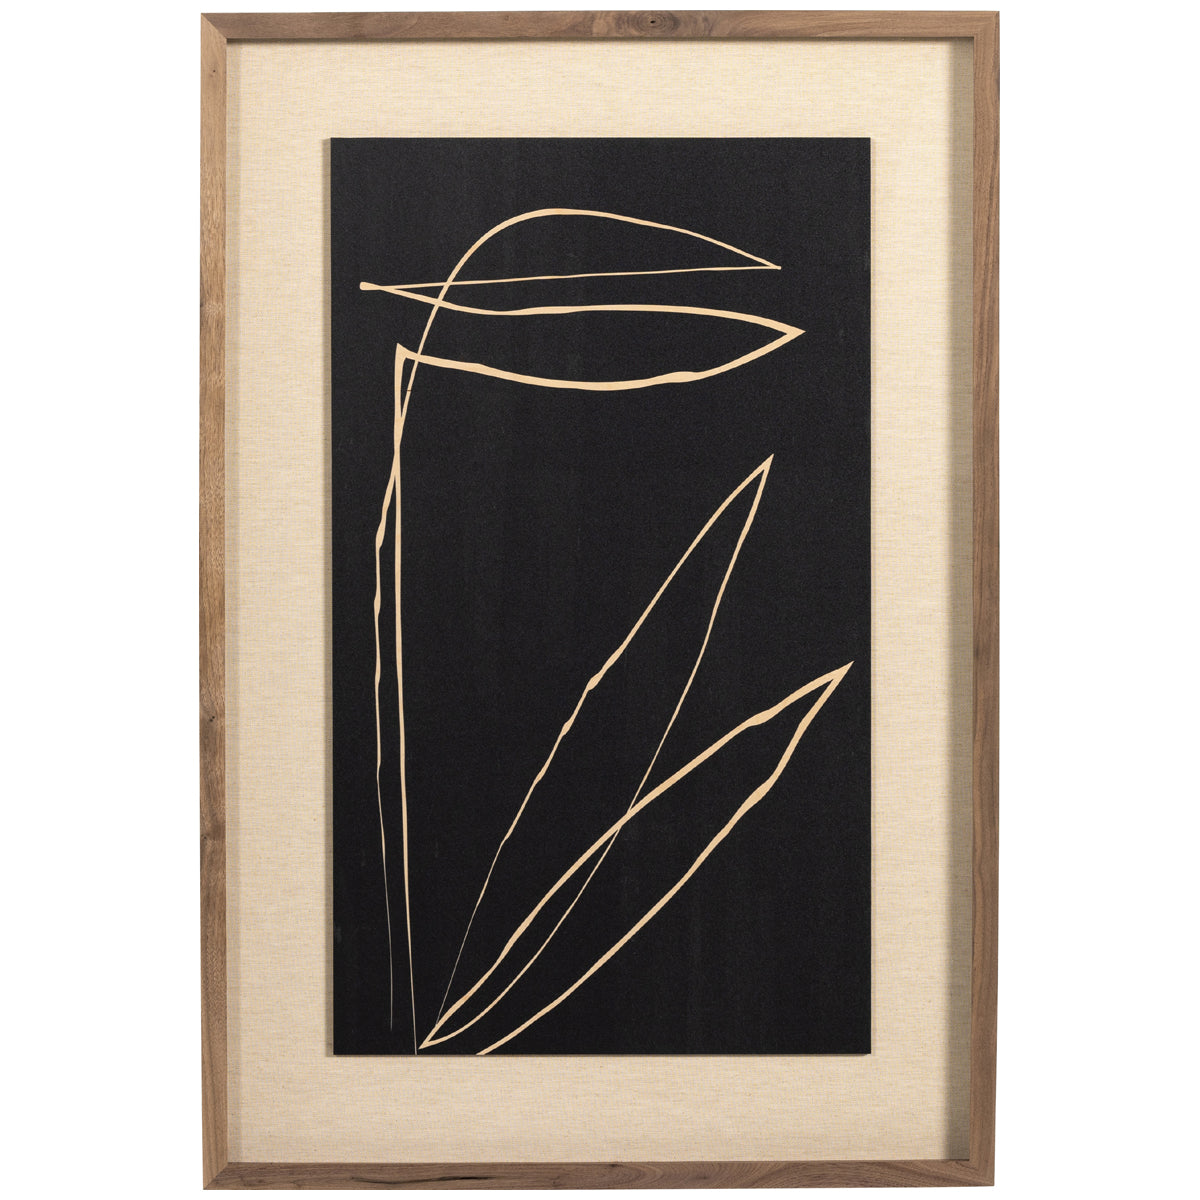 Four Hands Art Studio Abstract Botanic Line Drawing - Roseanne